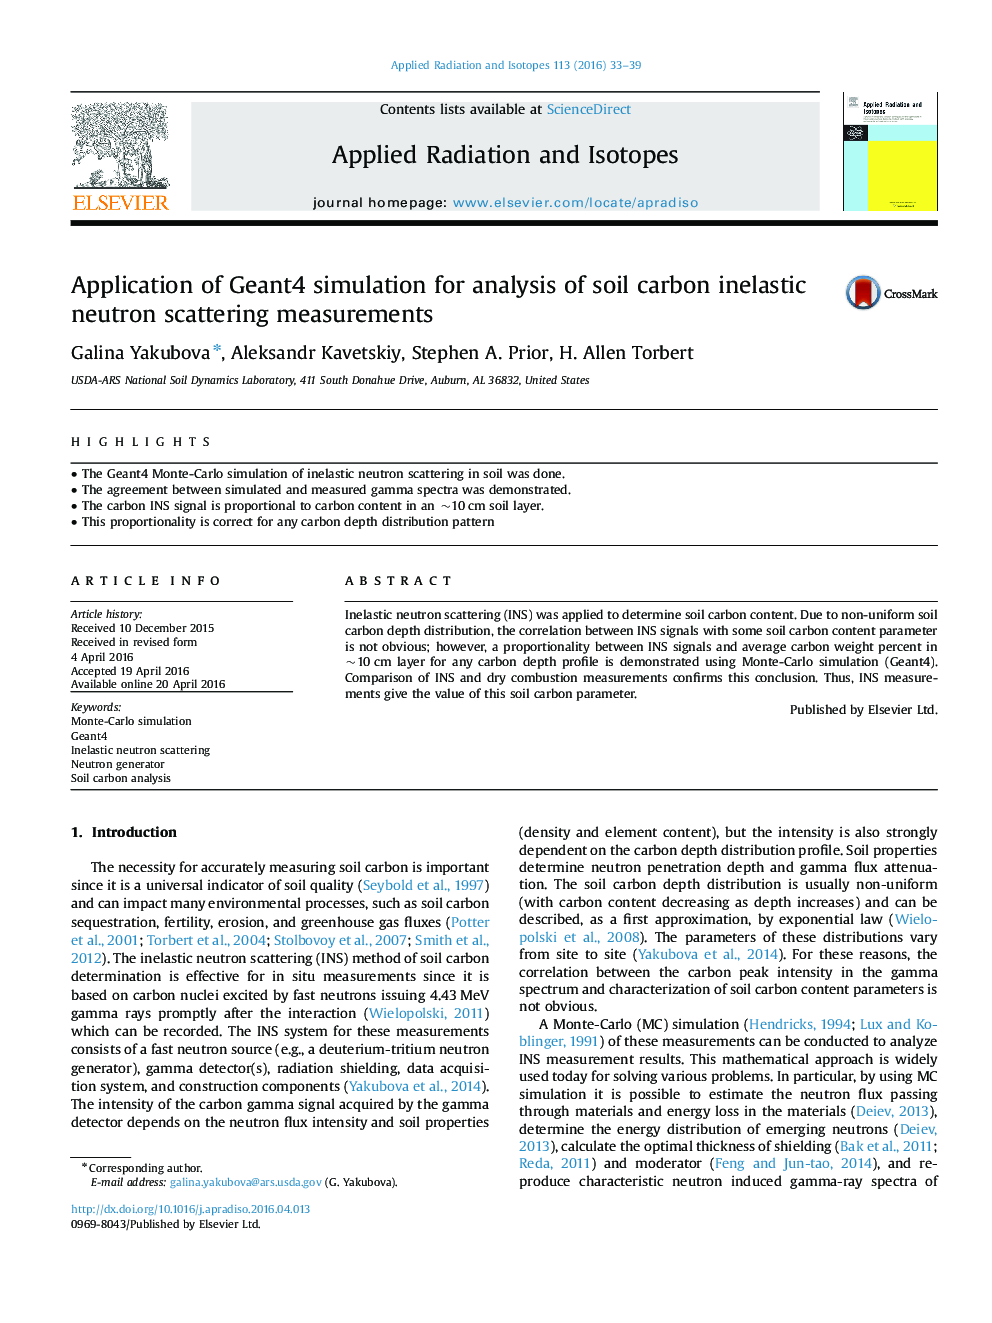 Application of Geant4 simulation for analysis of soil carbon inelastic neutron scattering measurements